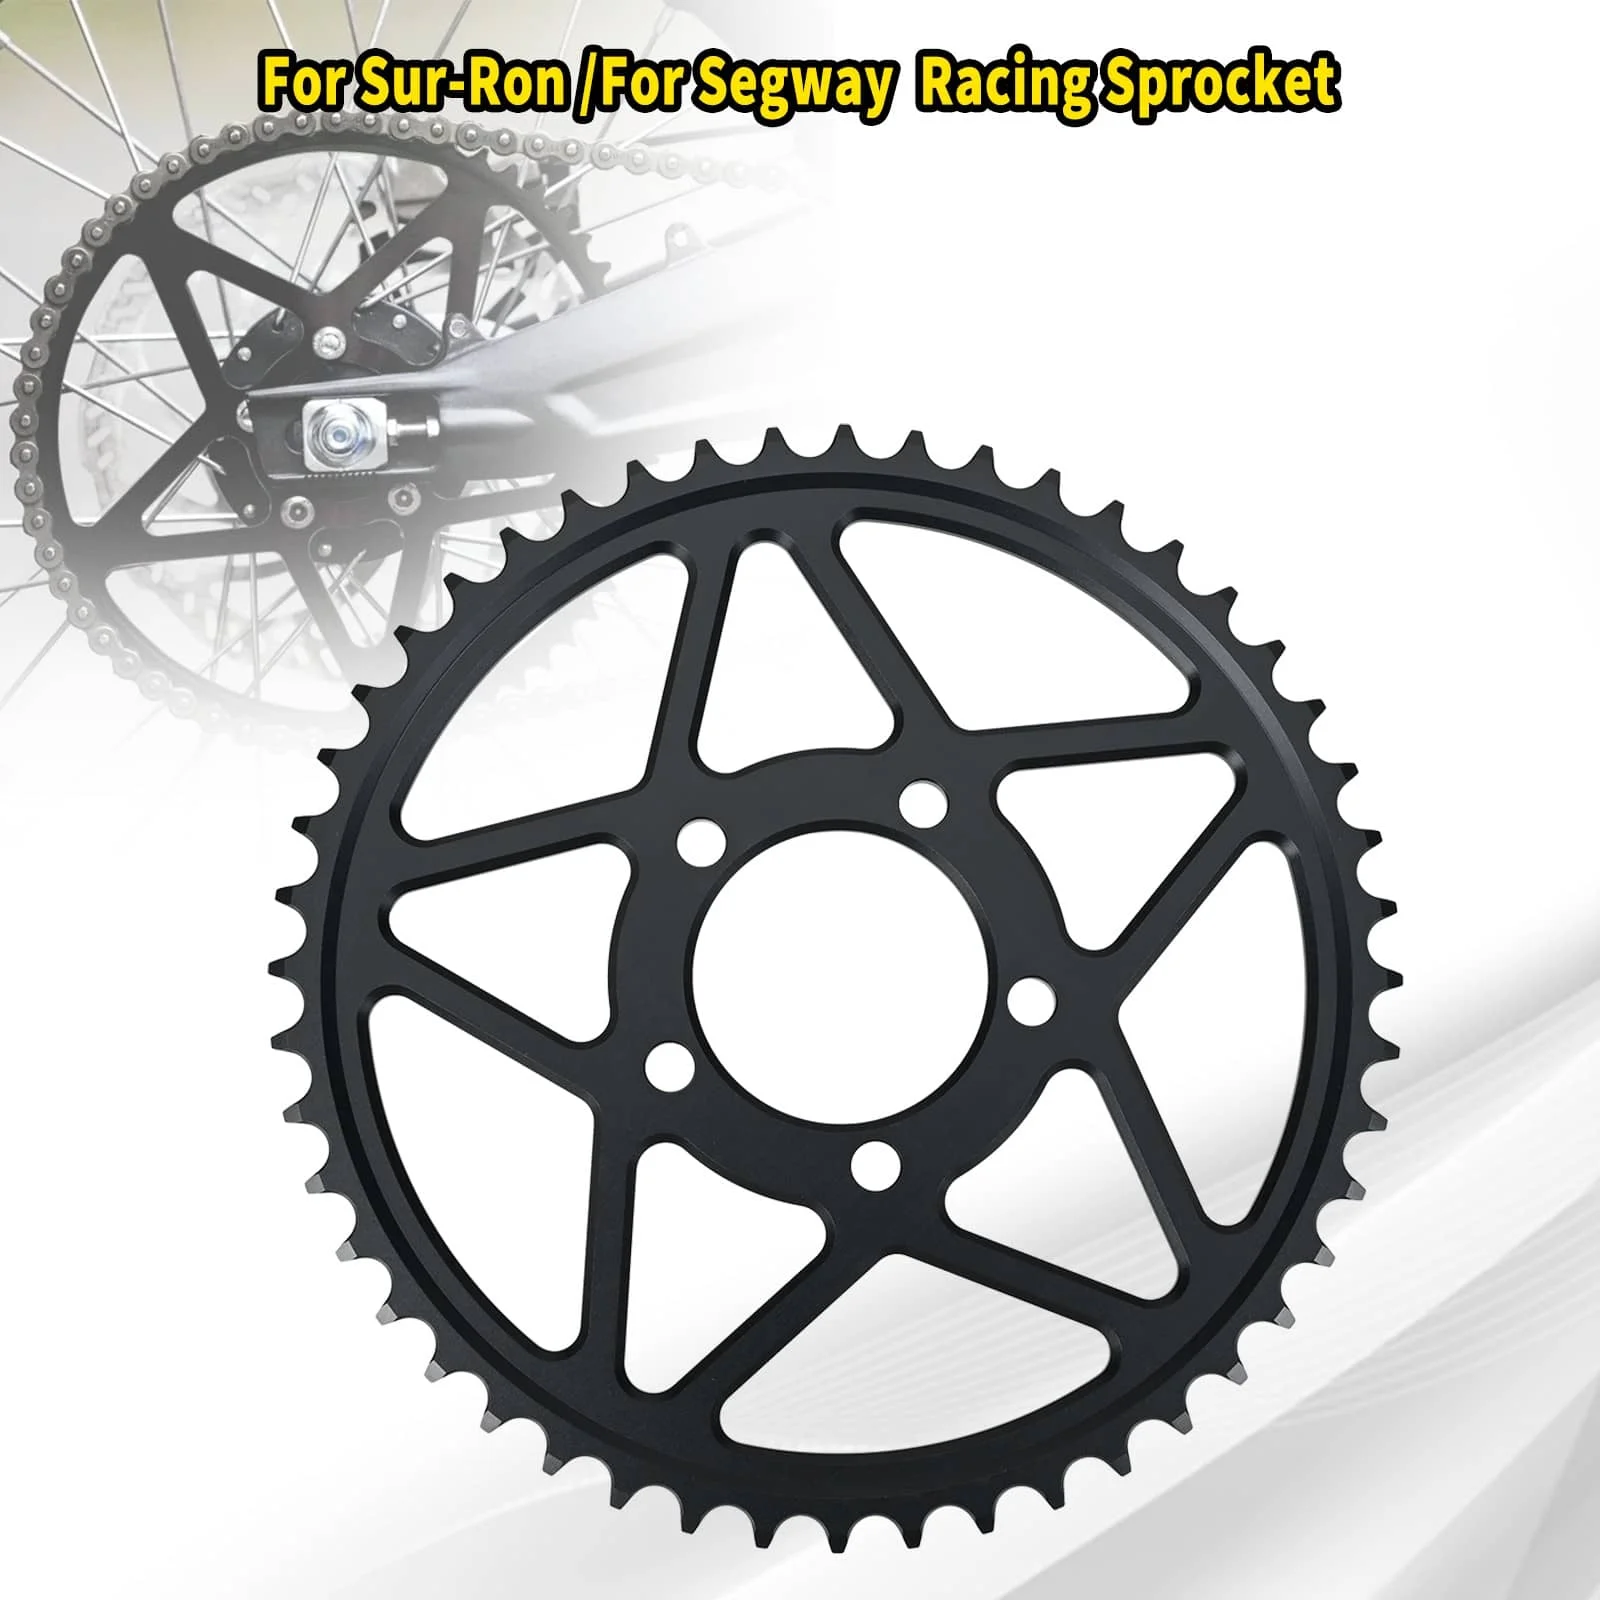 

Anodized Billet 48T 54T 58T Racing Sprocket For Sur Ron Segway X160 X260 Rear Sprocket Rear Chain Pulley Modification Tools HOT